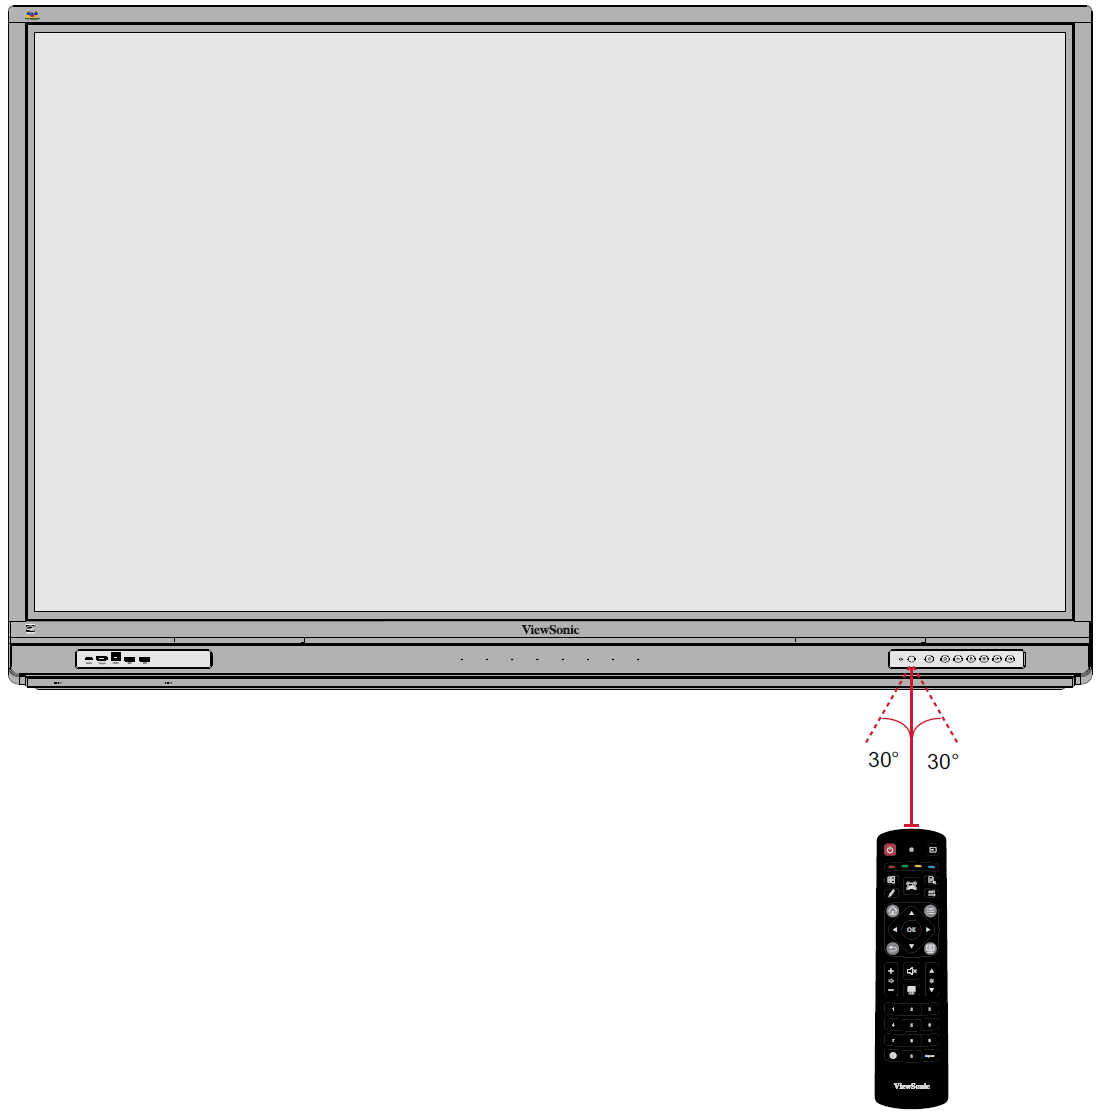 Effective Range of the Remote Control